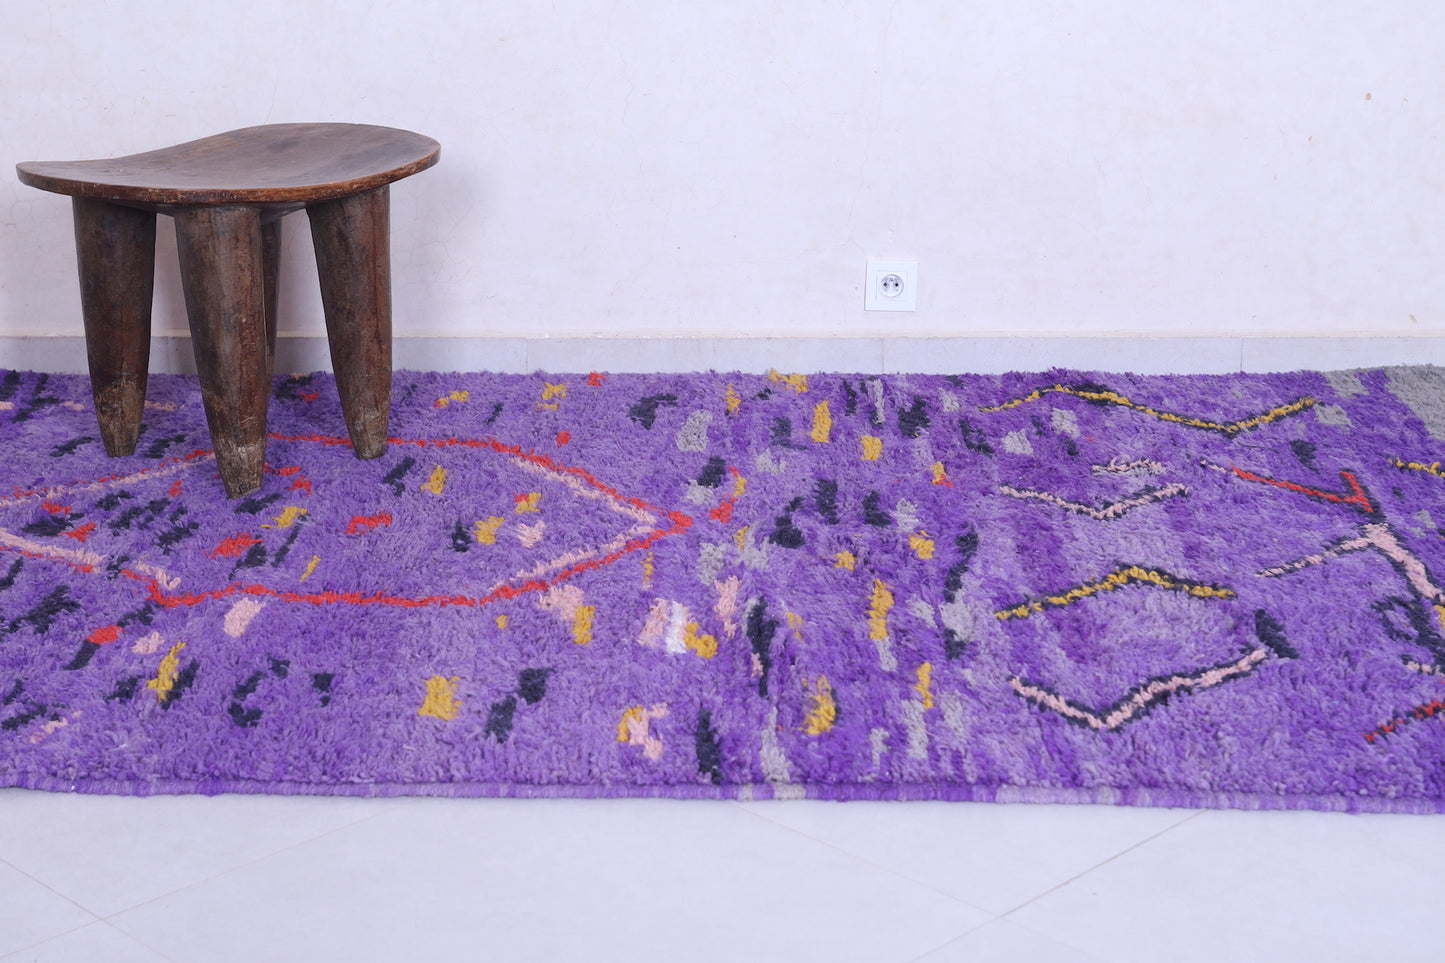 Purple handmade moroccan contemporary rug 5.4 FT X 8.6 FT